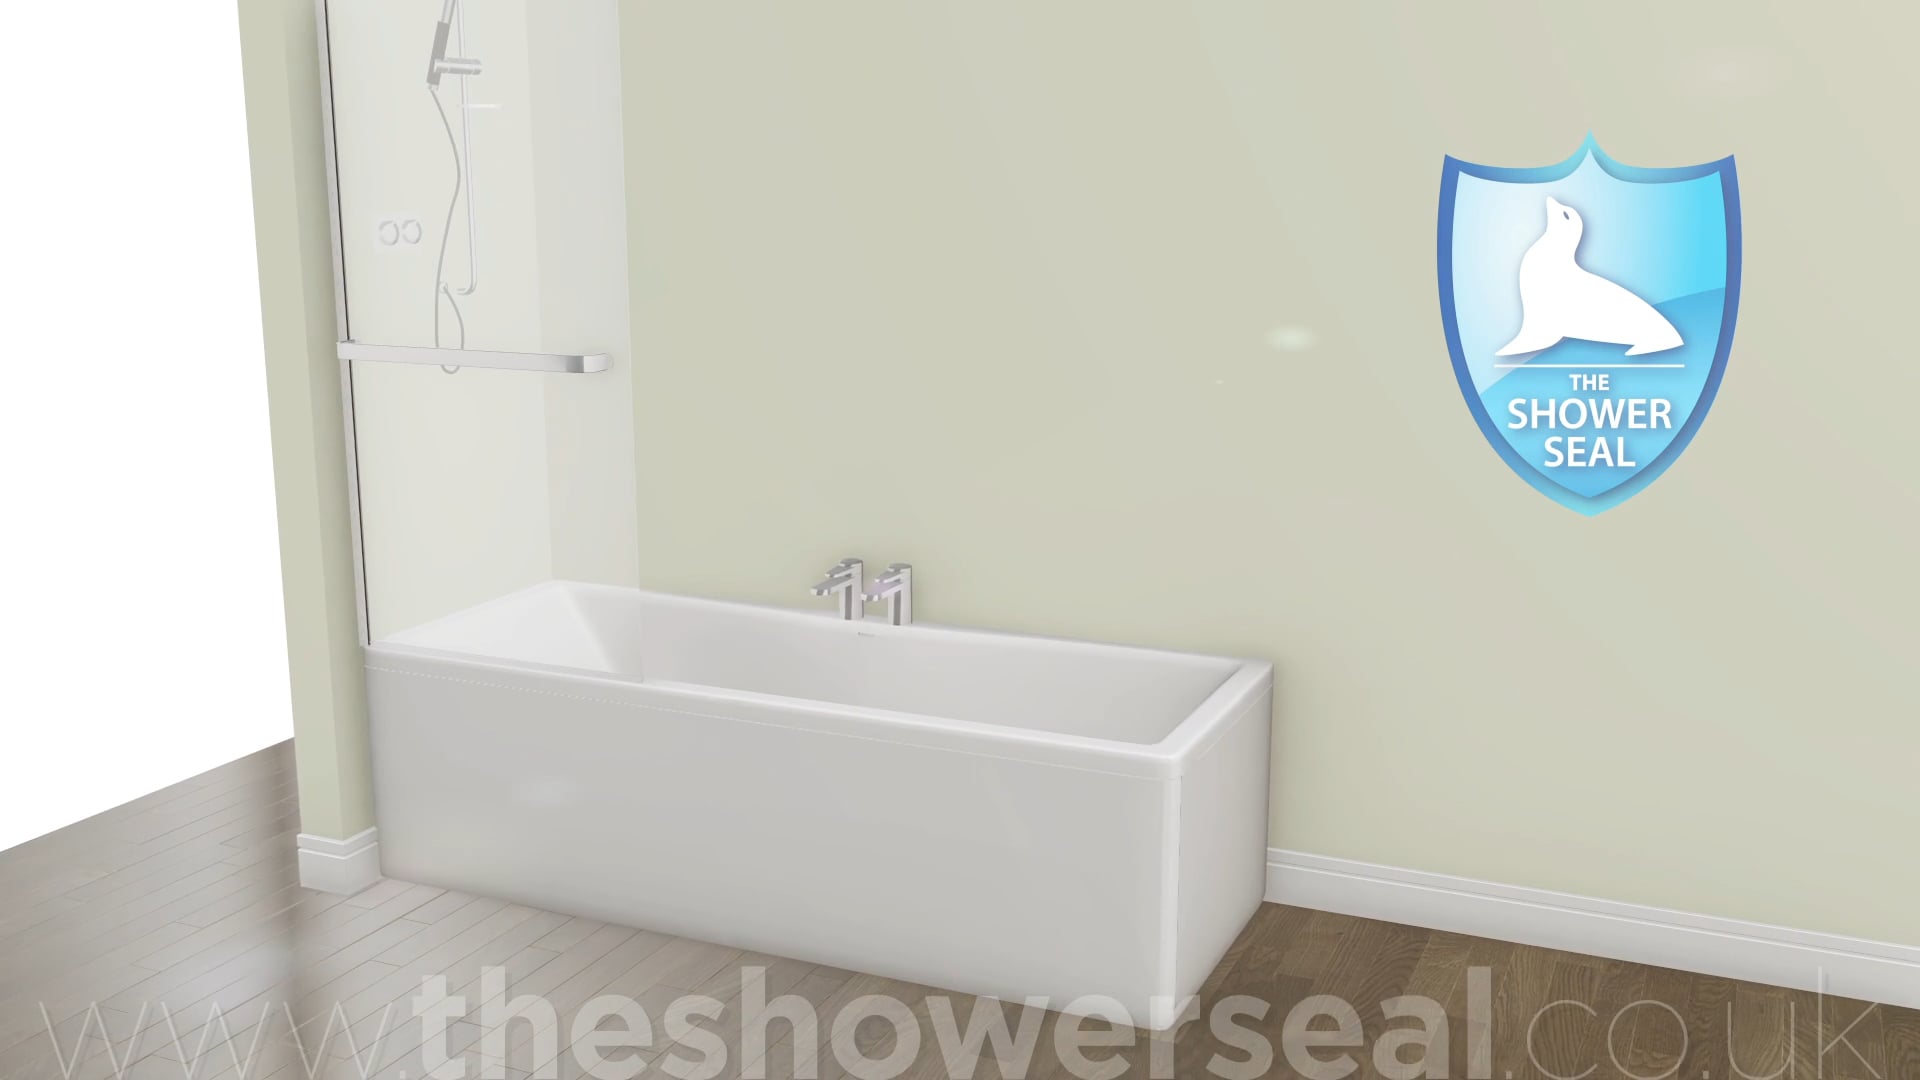 The Shower Seal